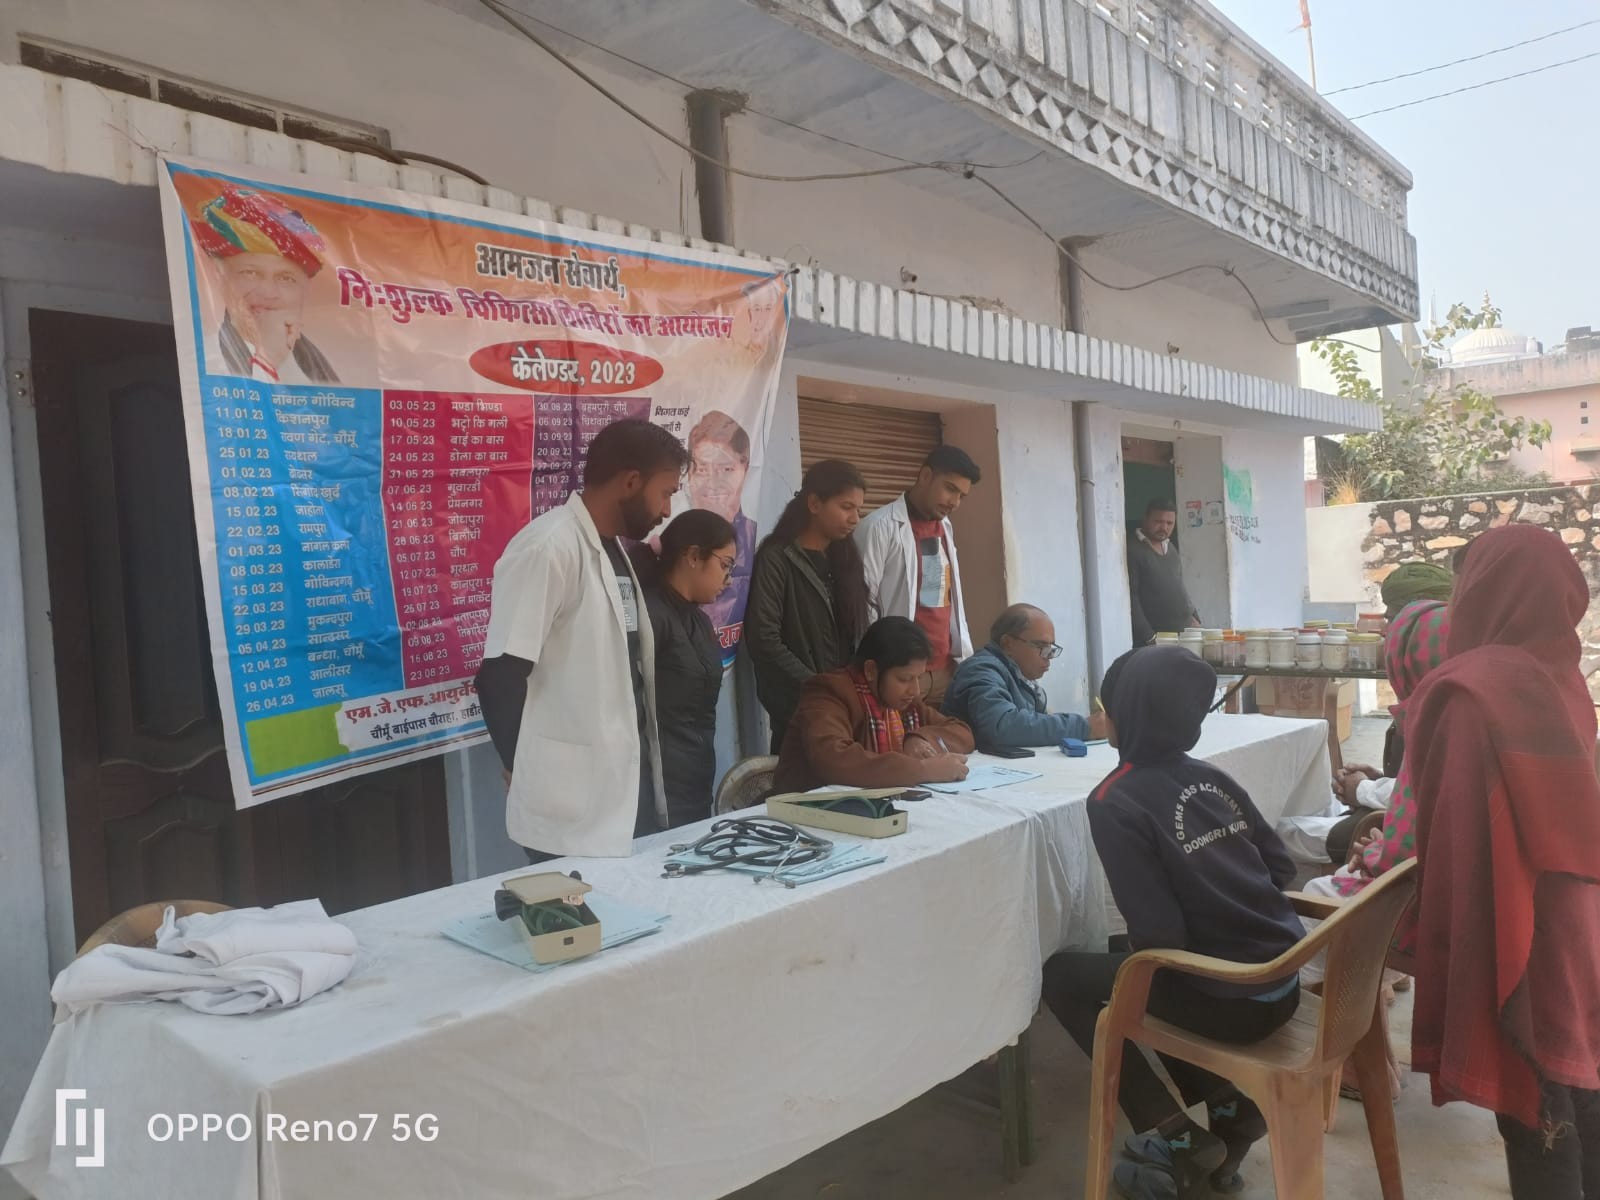 WEEKLY FREE MEDICAL CAMP ORGANIZED AT VILLAGE RAITHAL ON DATED 25 JANUARY  2023 AS PER SCHEDULE